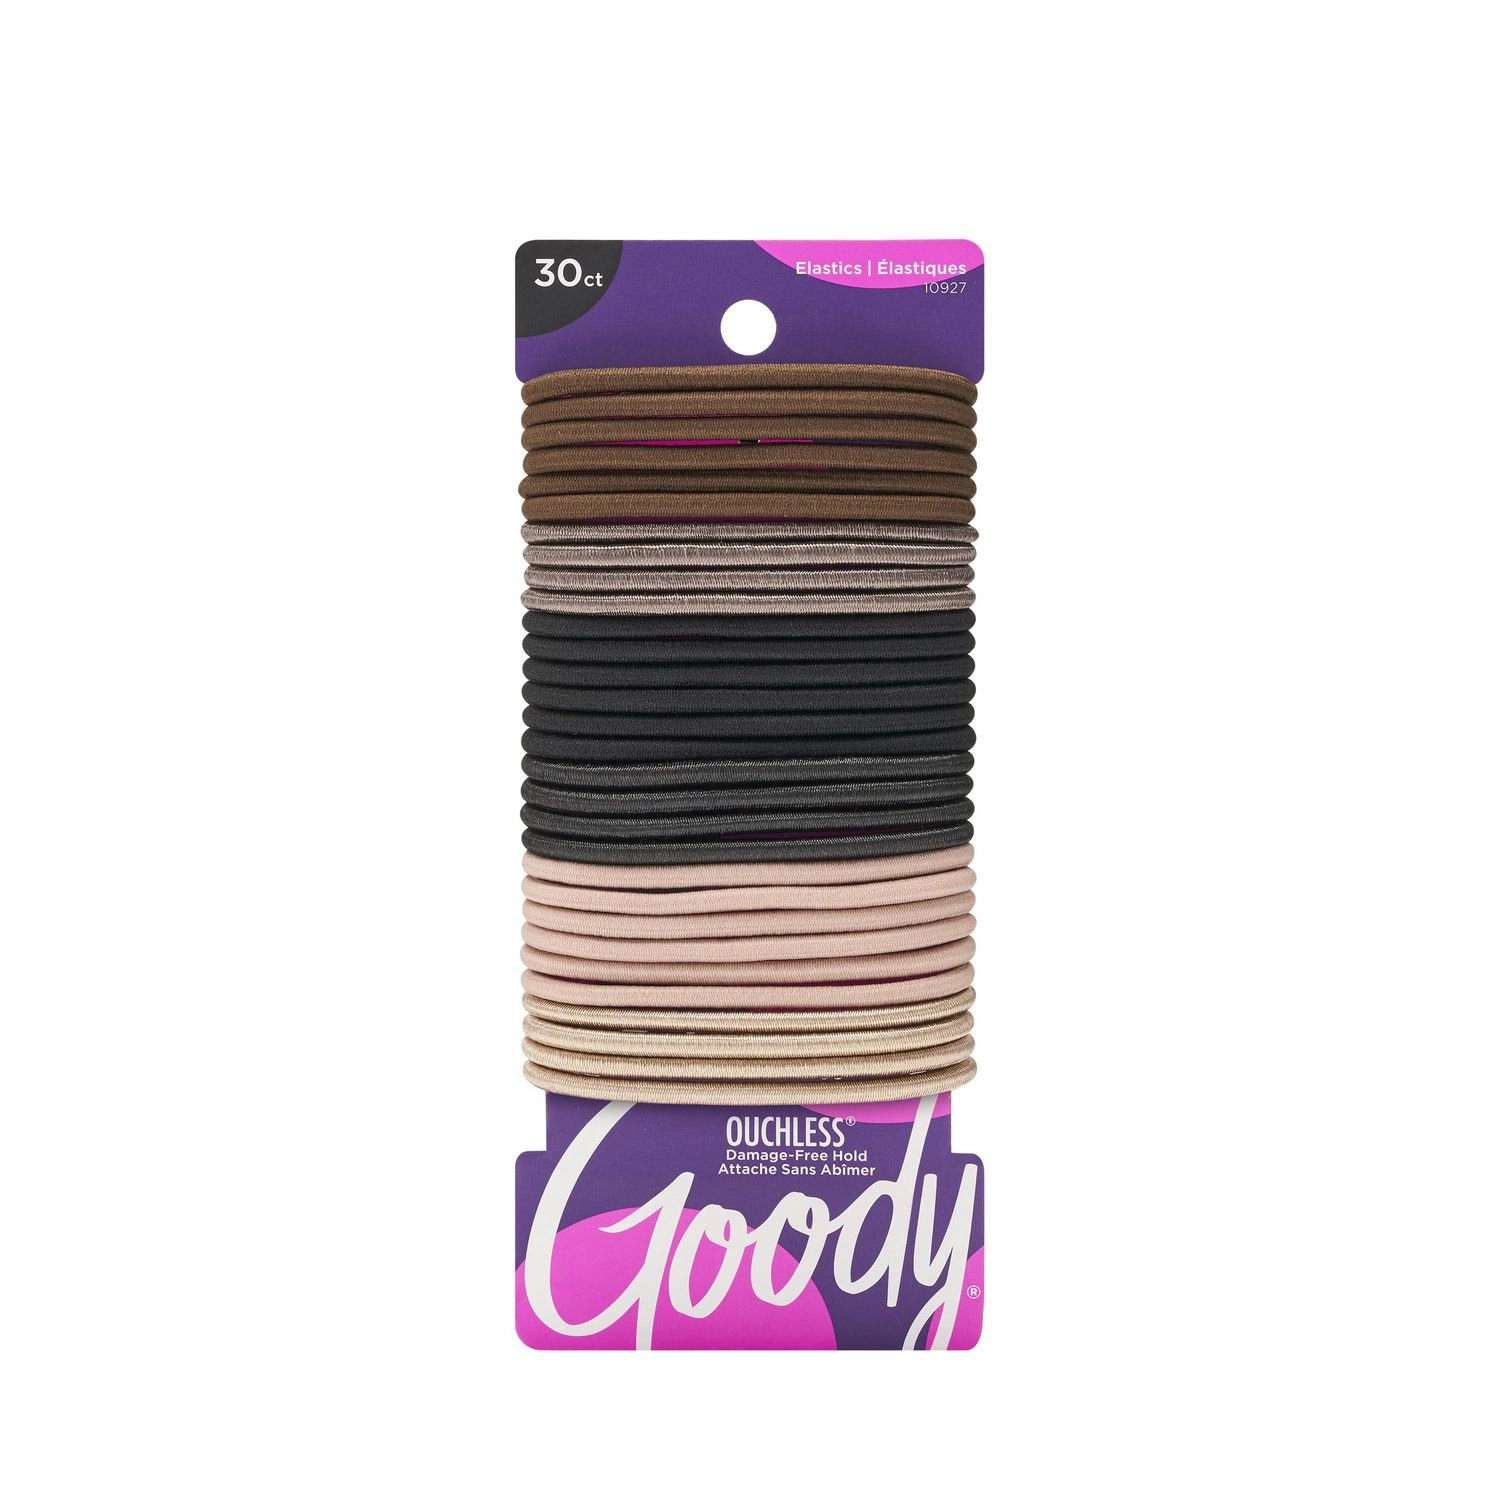 Goody Ouchless 4mm Elastics Starry Nights 30ct UPC: 041457109274 Pack:72/3 - Click Image to Close